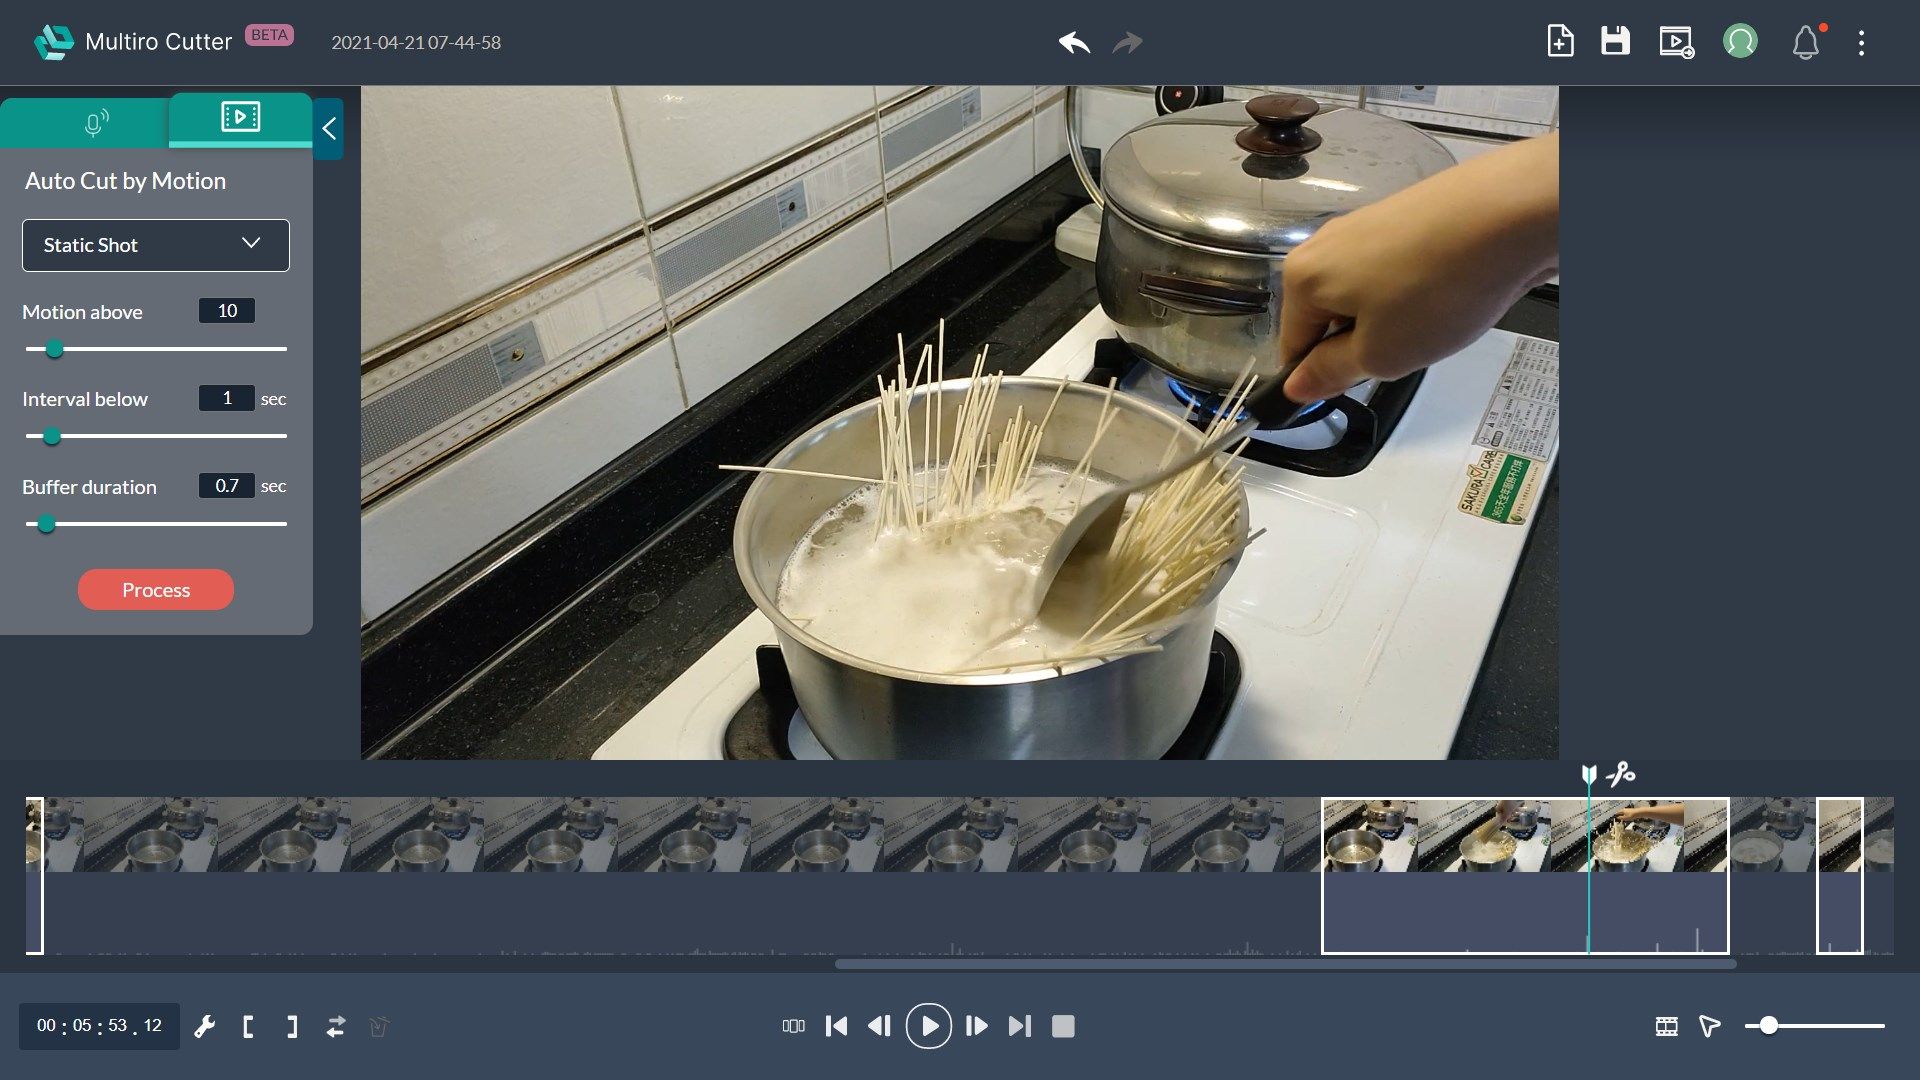 Automatically mark the scenes with noticeable motions in a home cooking video.